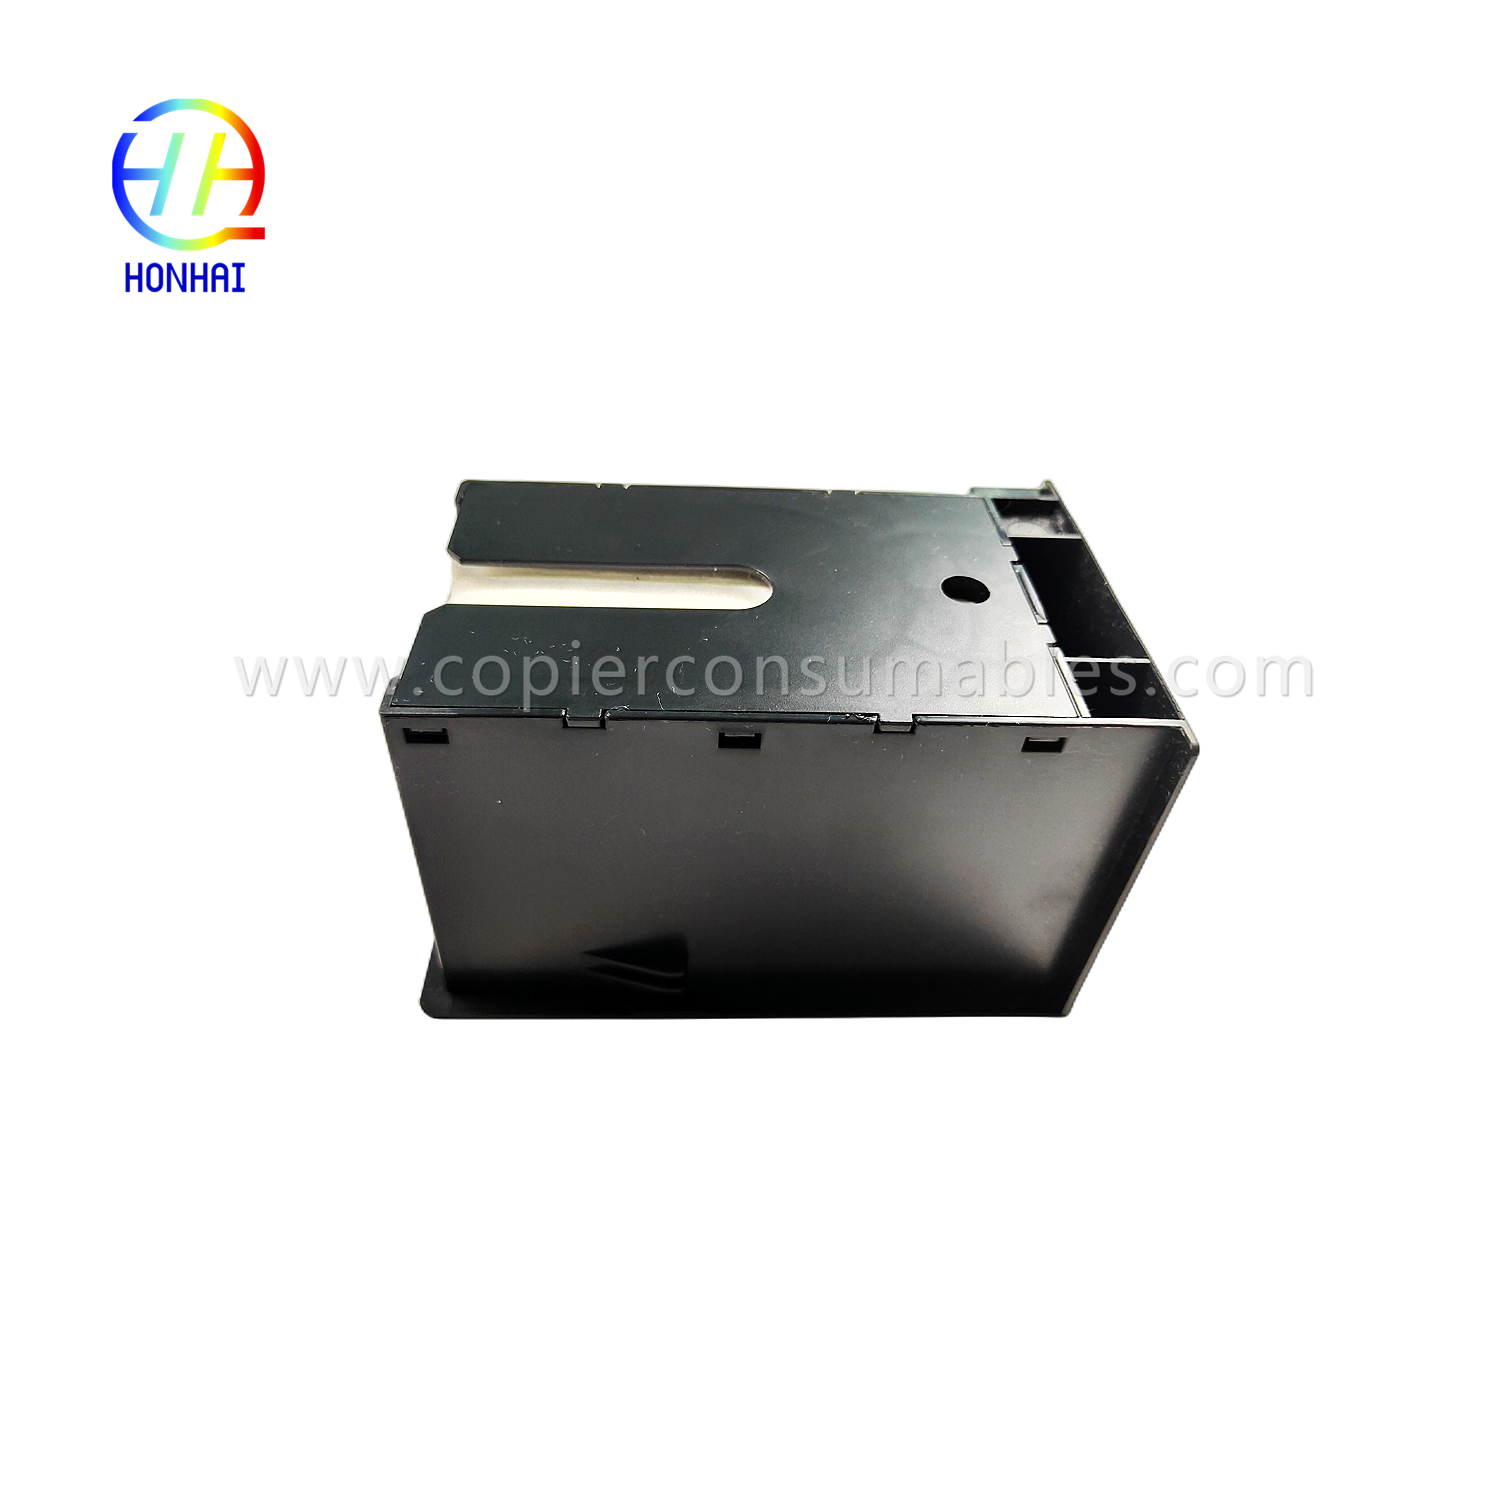 Waste box for Epson WorkForce WP-4535 4540 4545 4590 4595 M4015 M4095 M4525 M4595 T6710